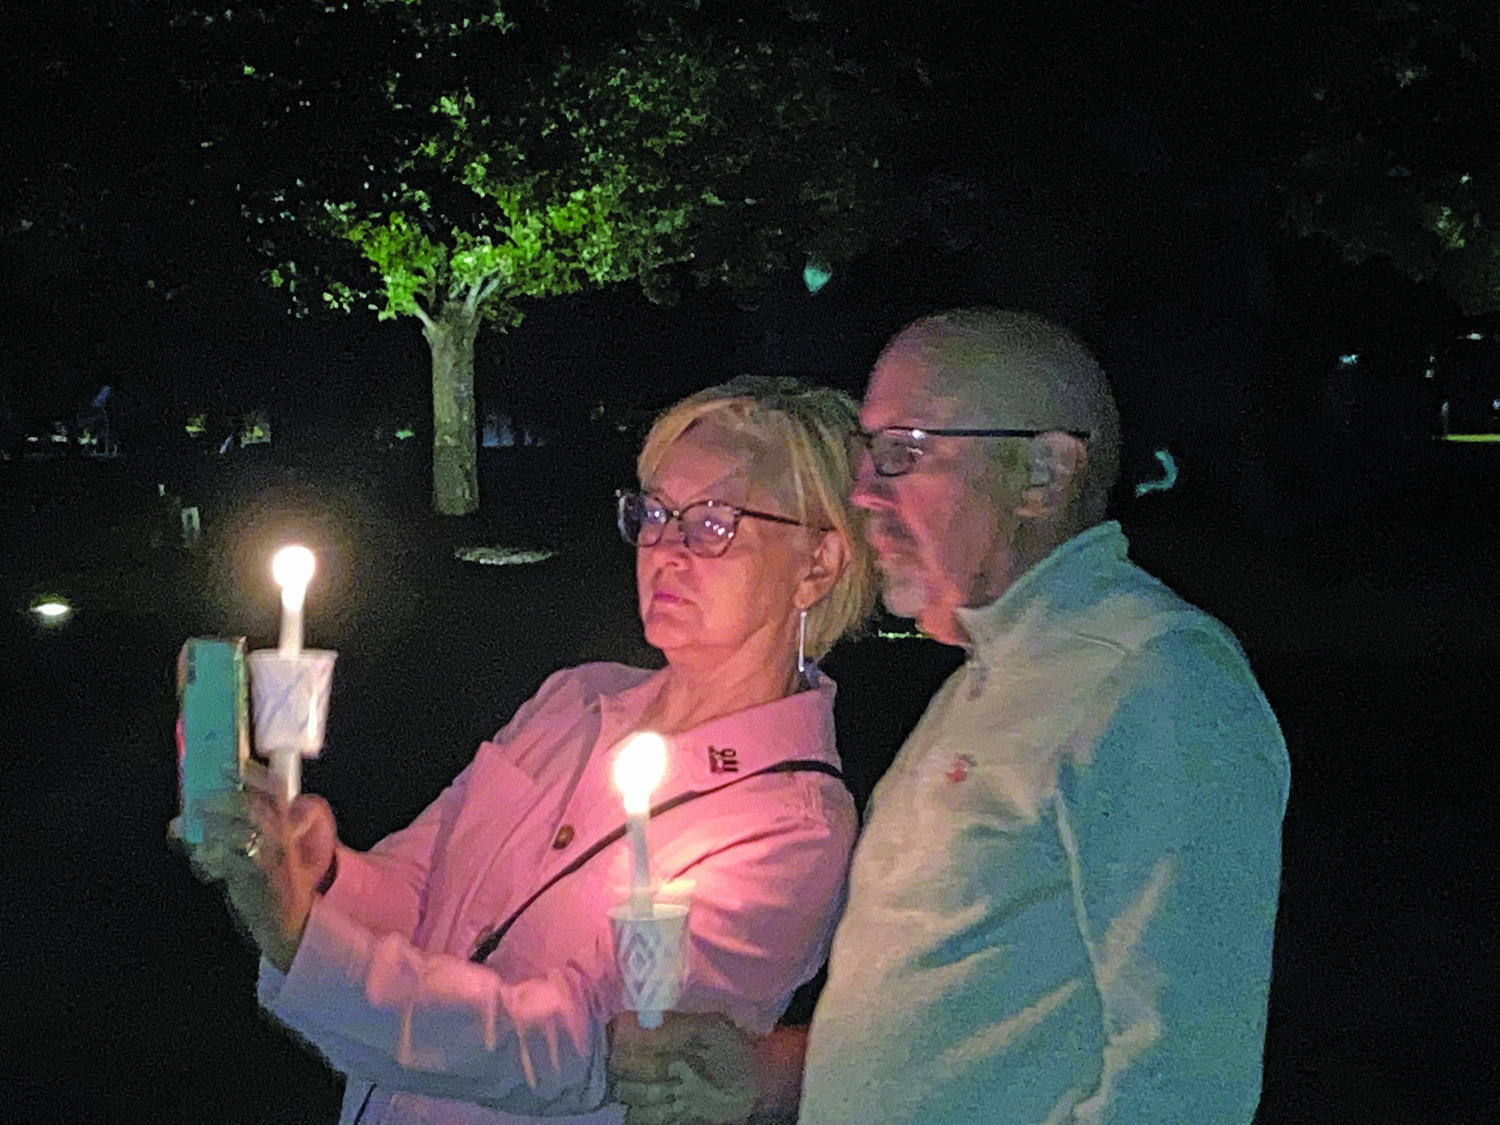 Lauren and David DeVido of Holland hold candles Saturday night during the closing candlelight vigil of an evening ceremony in Lower Makefield Township marking 20 years since the Sept. 11, 2001 terrorist attacks.